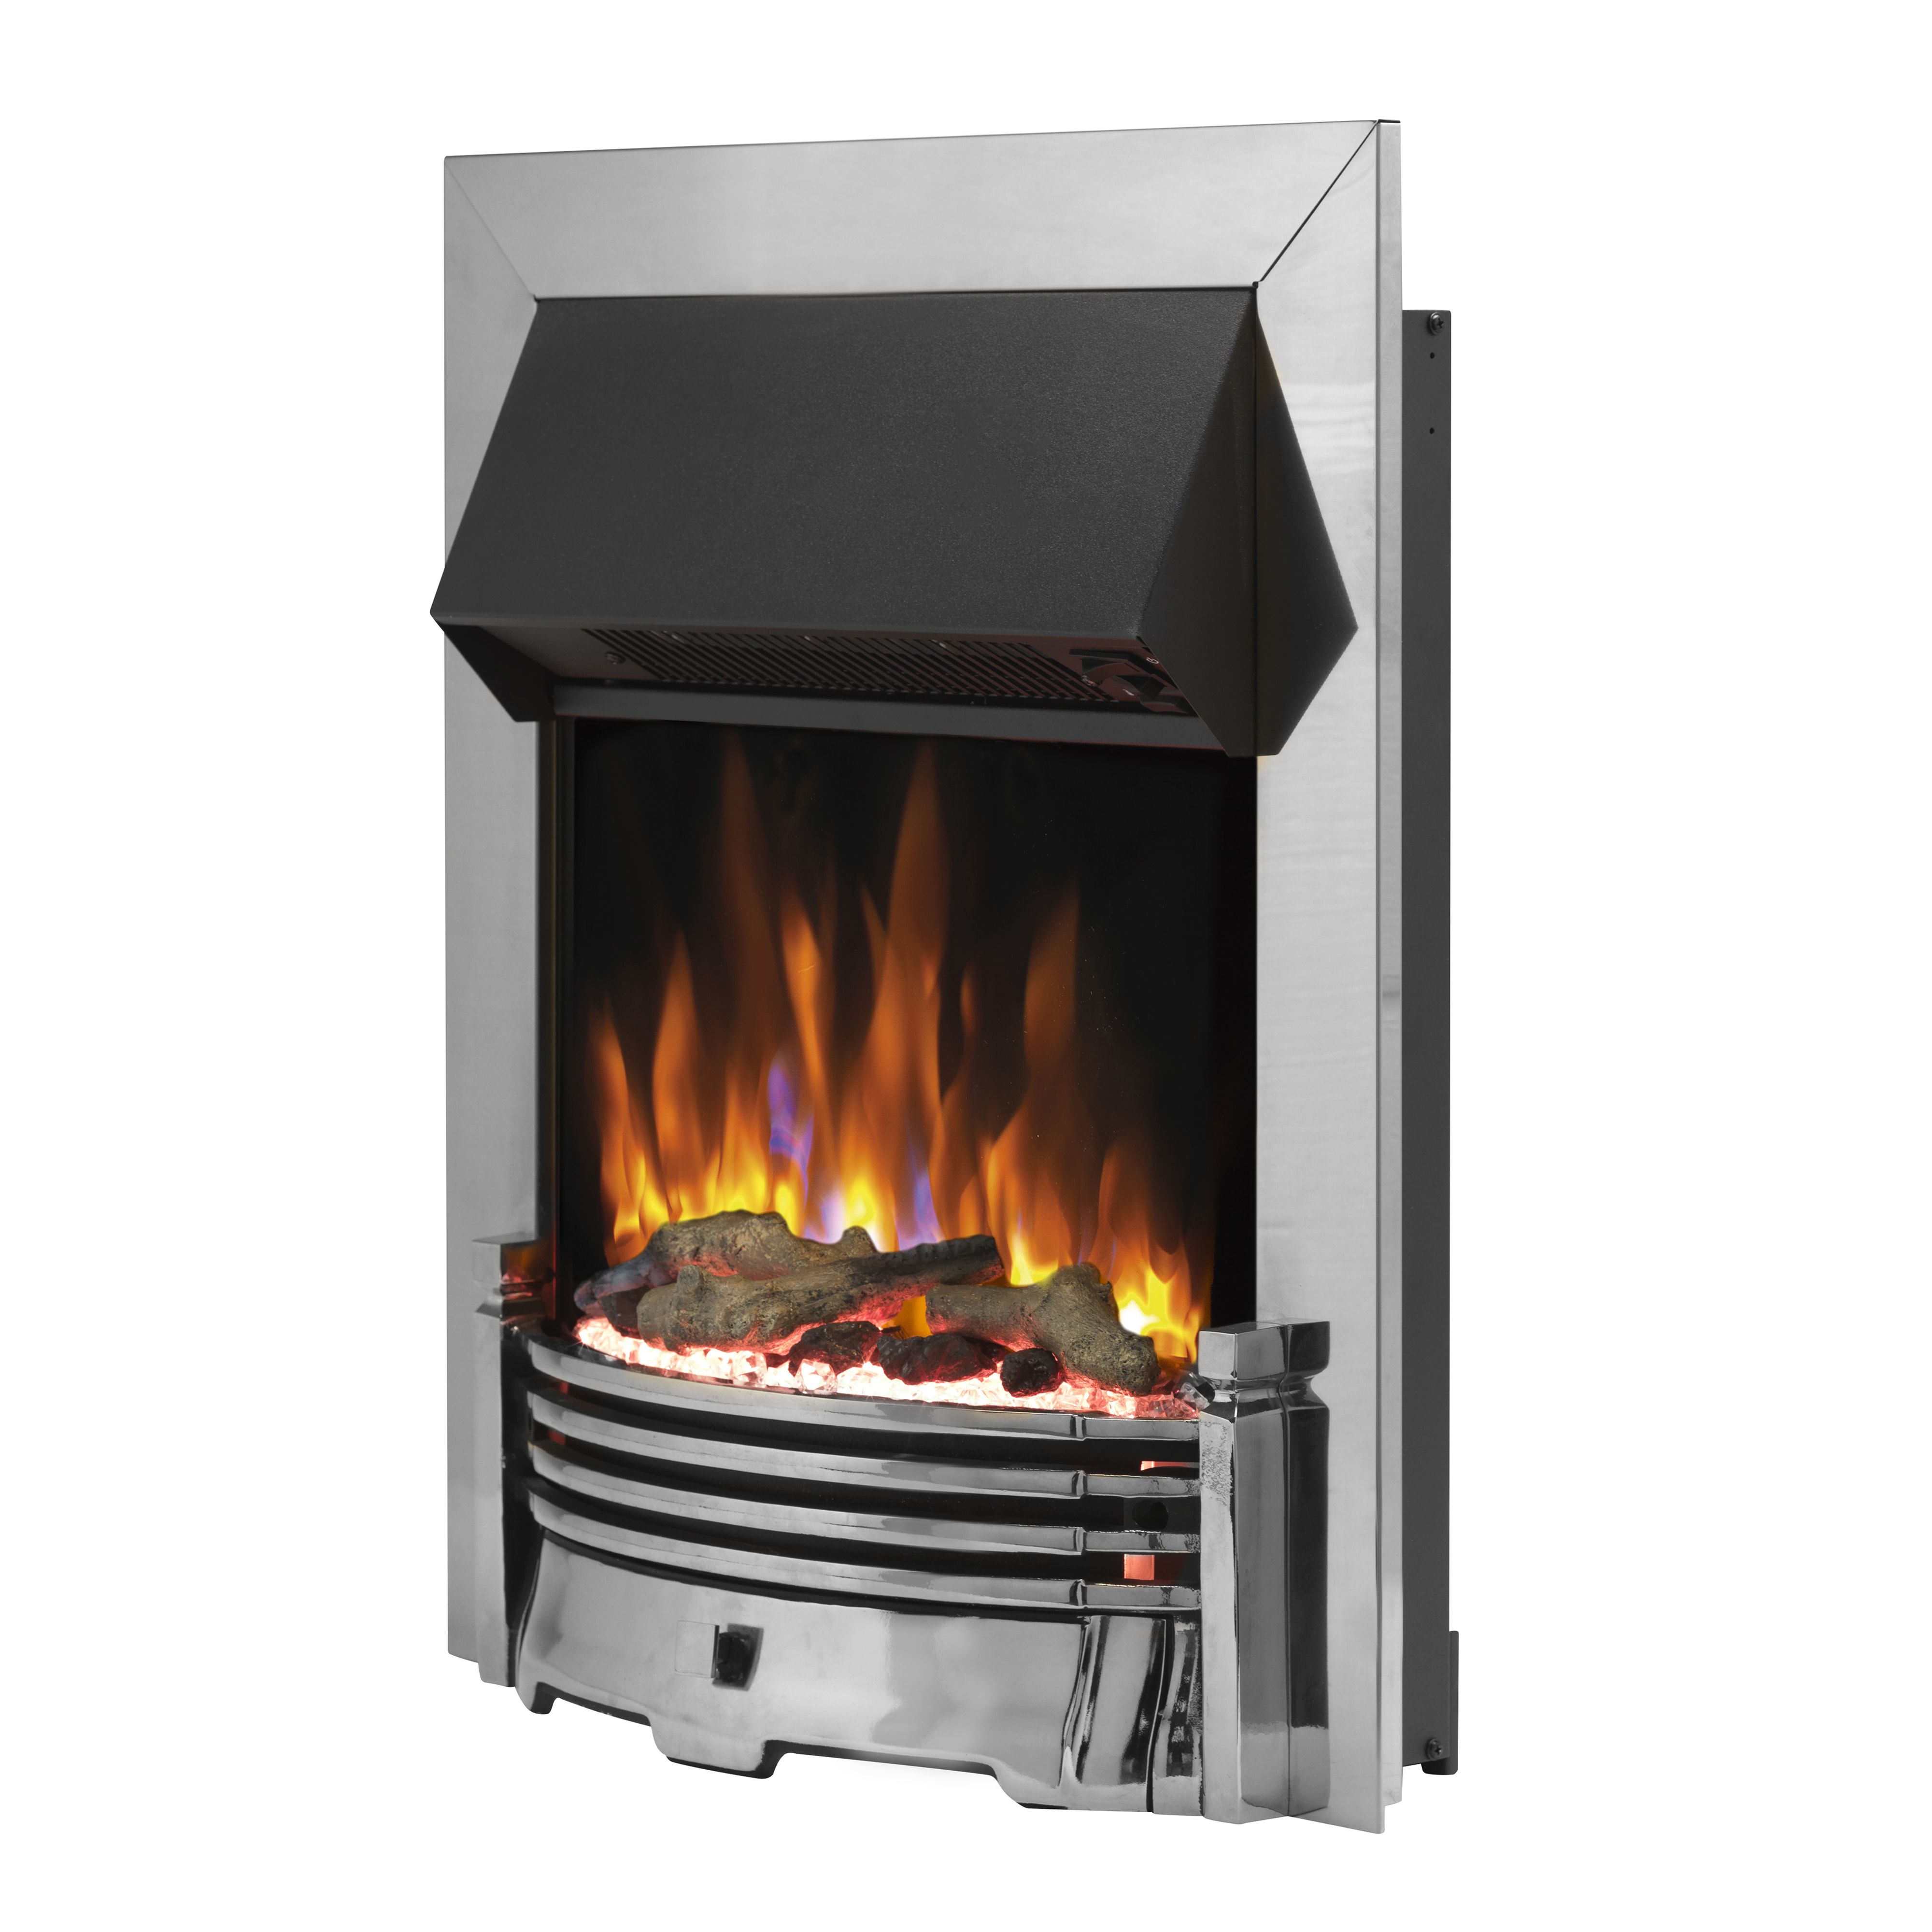 Dimplex Optiflame 2kW Chrome effect Electric Fire